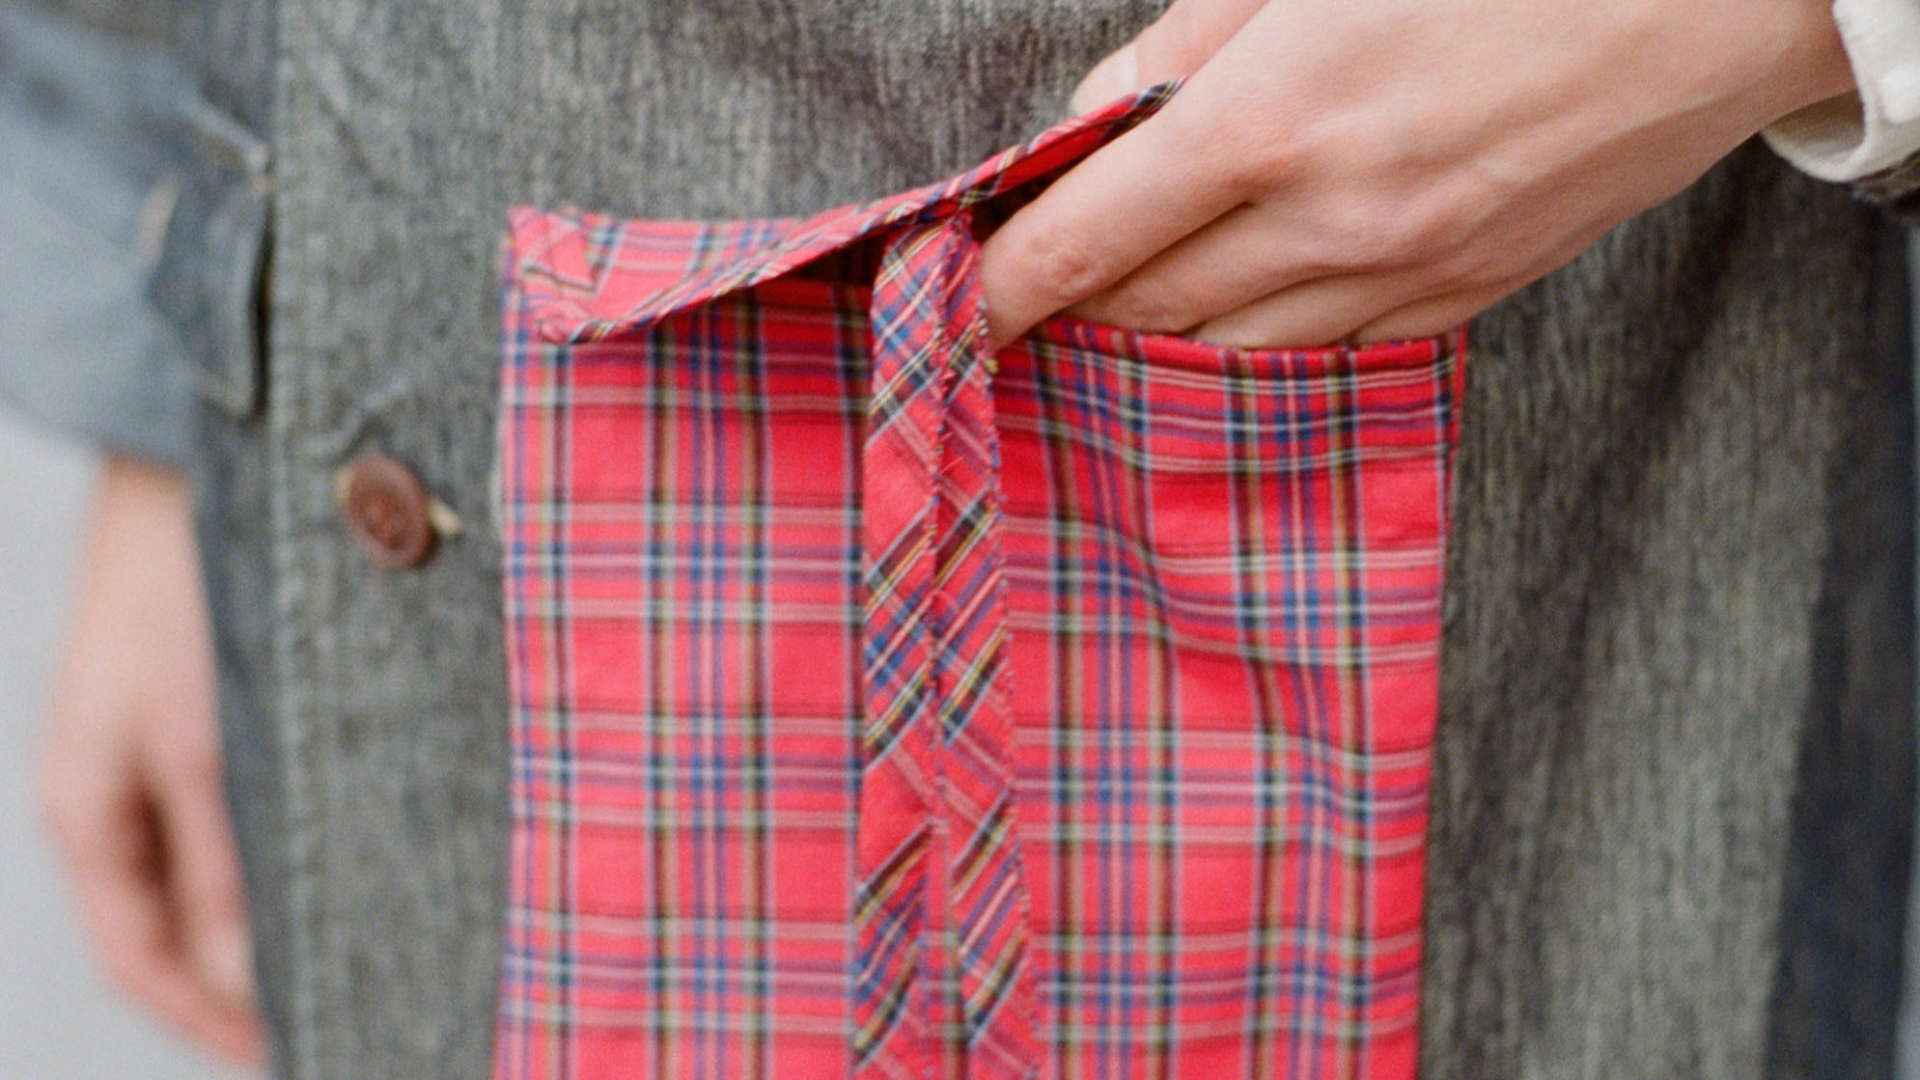 A close up of a women standing wearing a red tartan Future Archive attachable pocket bag on a denim coat with brown buttons. One hand is entering the attachable pocket and the other is relaxed at her side.